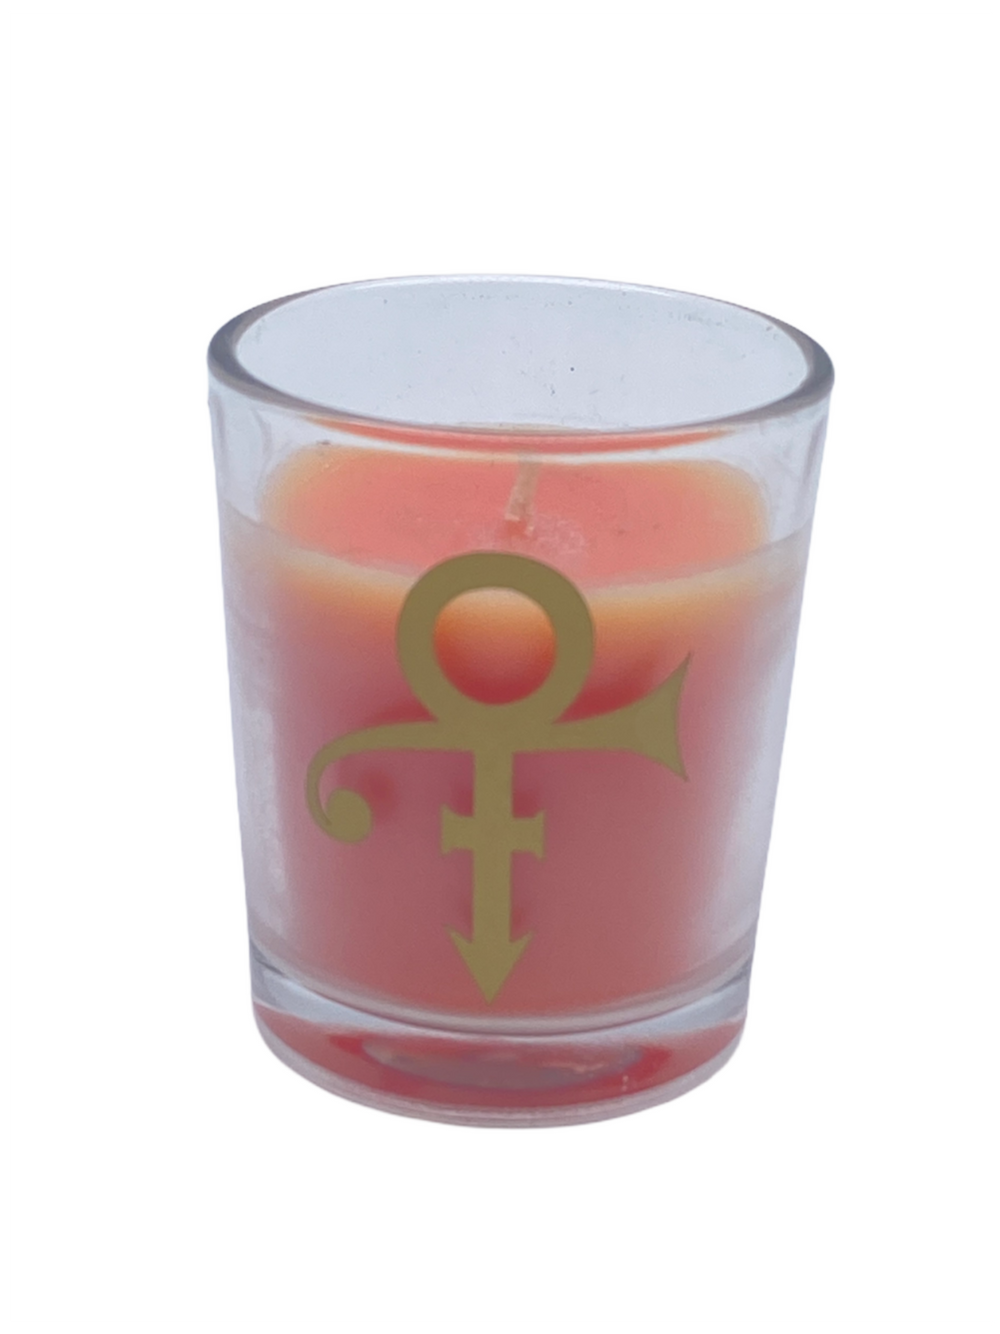 Prince – Original NPG Store Official Merch Small Candle In Holder Gold Love Symbol Prince Peach